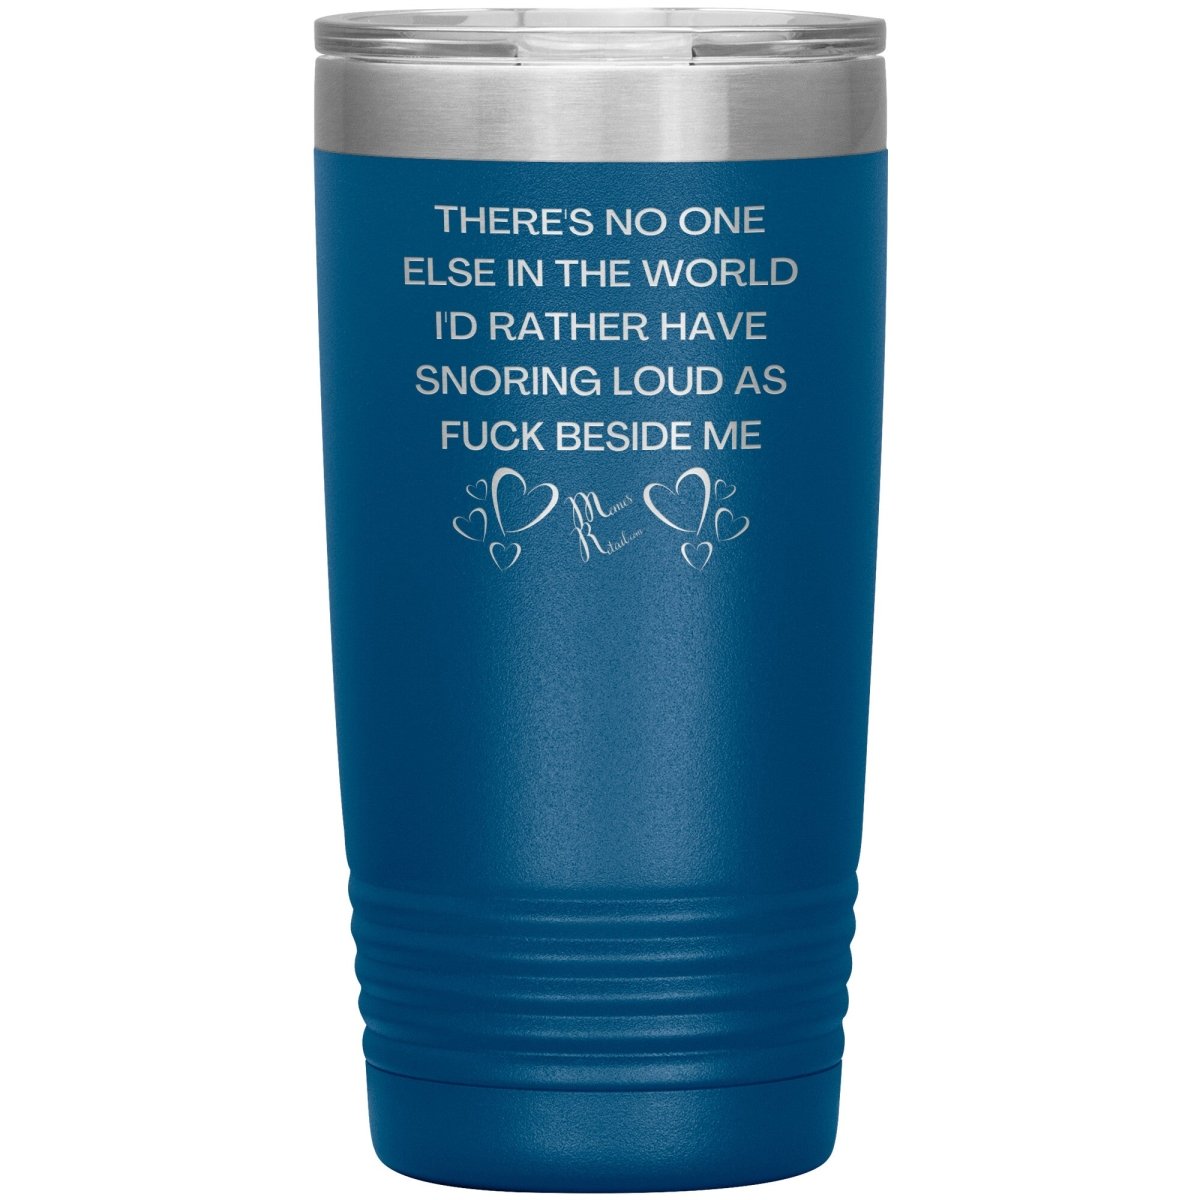 There's No One Else in the World I'd Rather Have Snoring Loud, 20oz Insulated Tumbler / Blue - MemesRetail.com